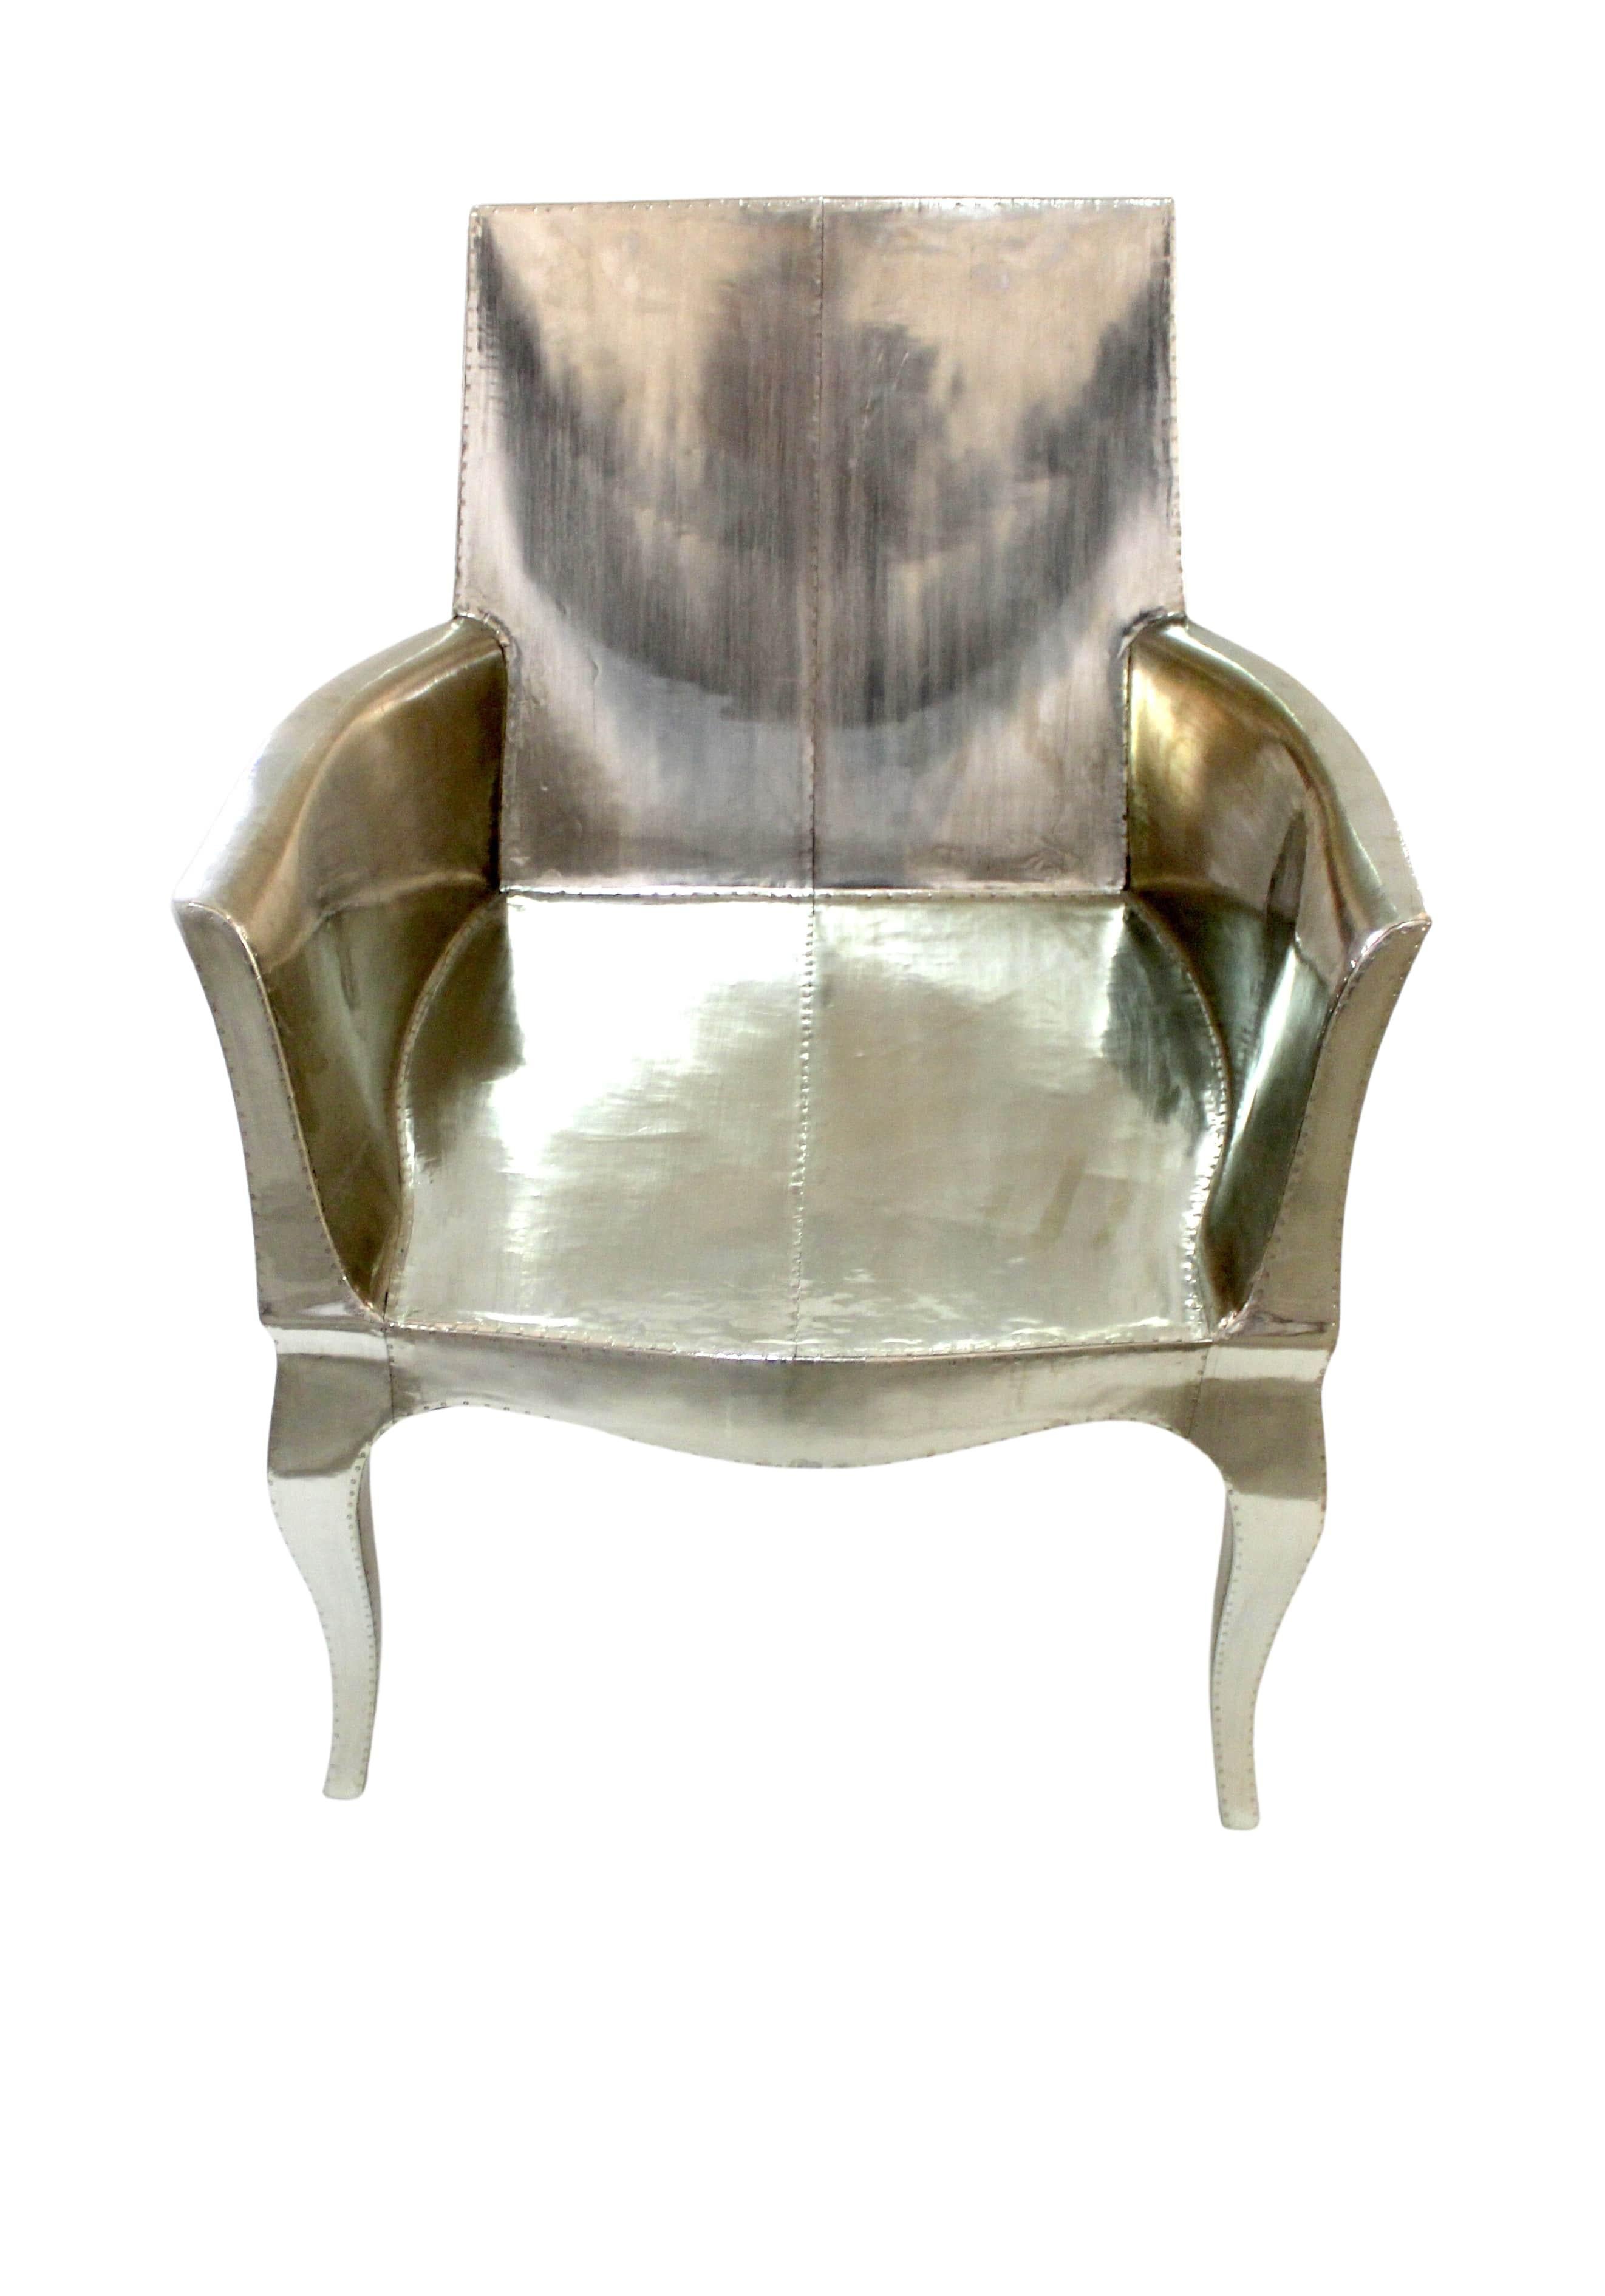 Bronzed Art Deco Lounge Chair Pair Designed by Paul Mathieu for Stephanie Odegard For Sale